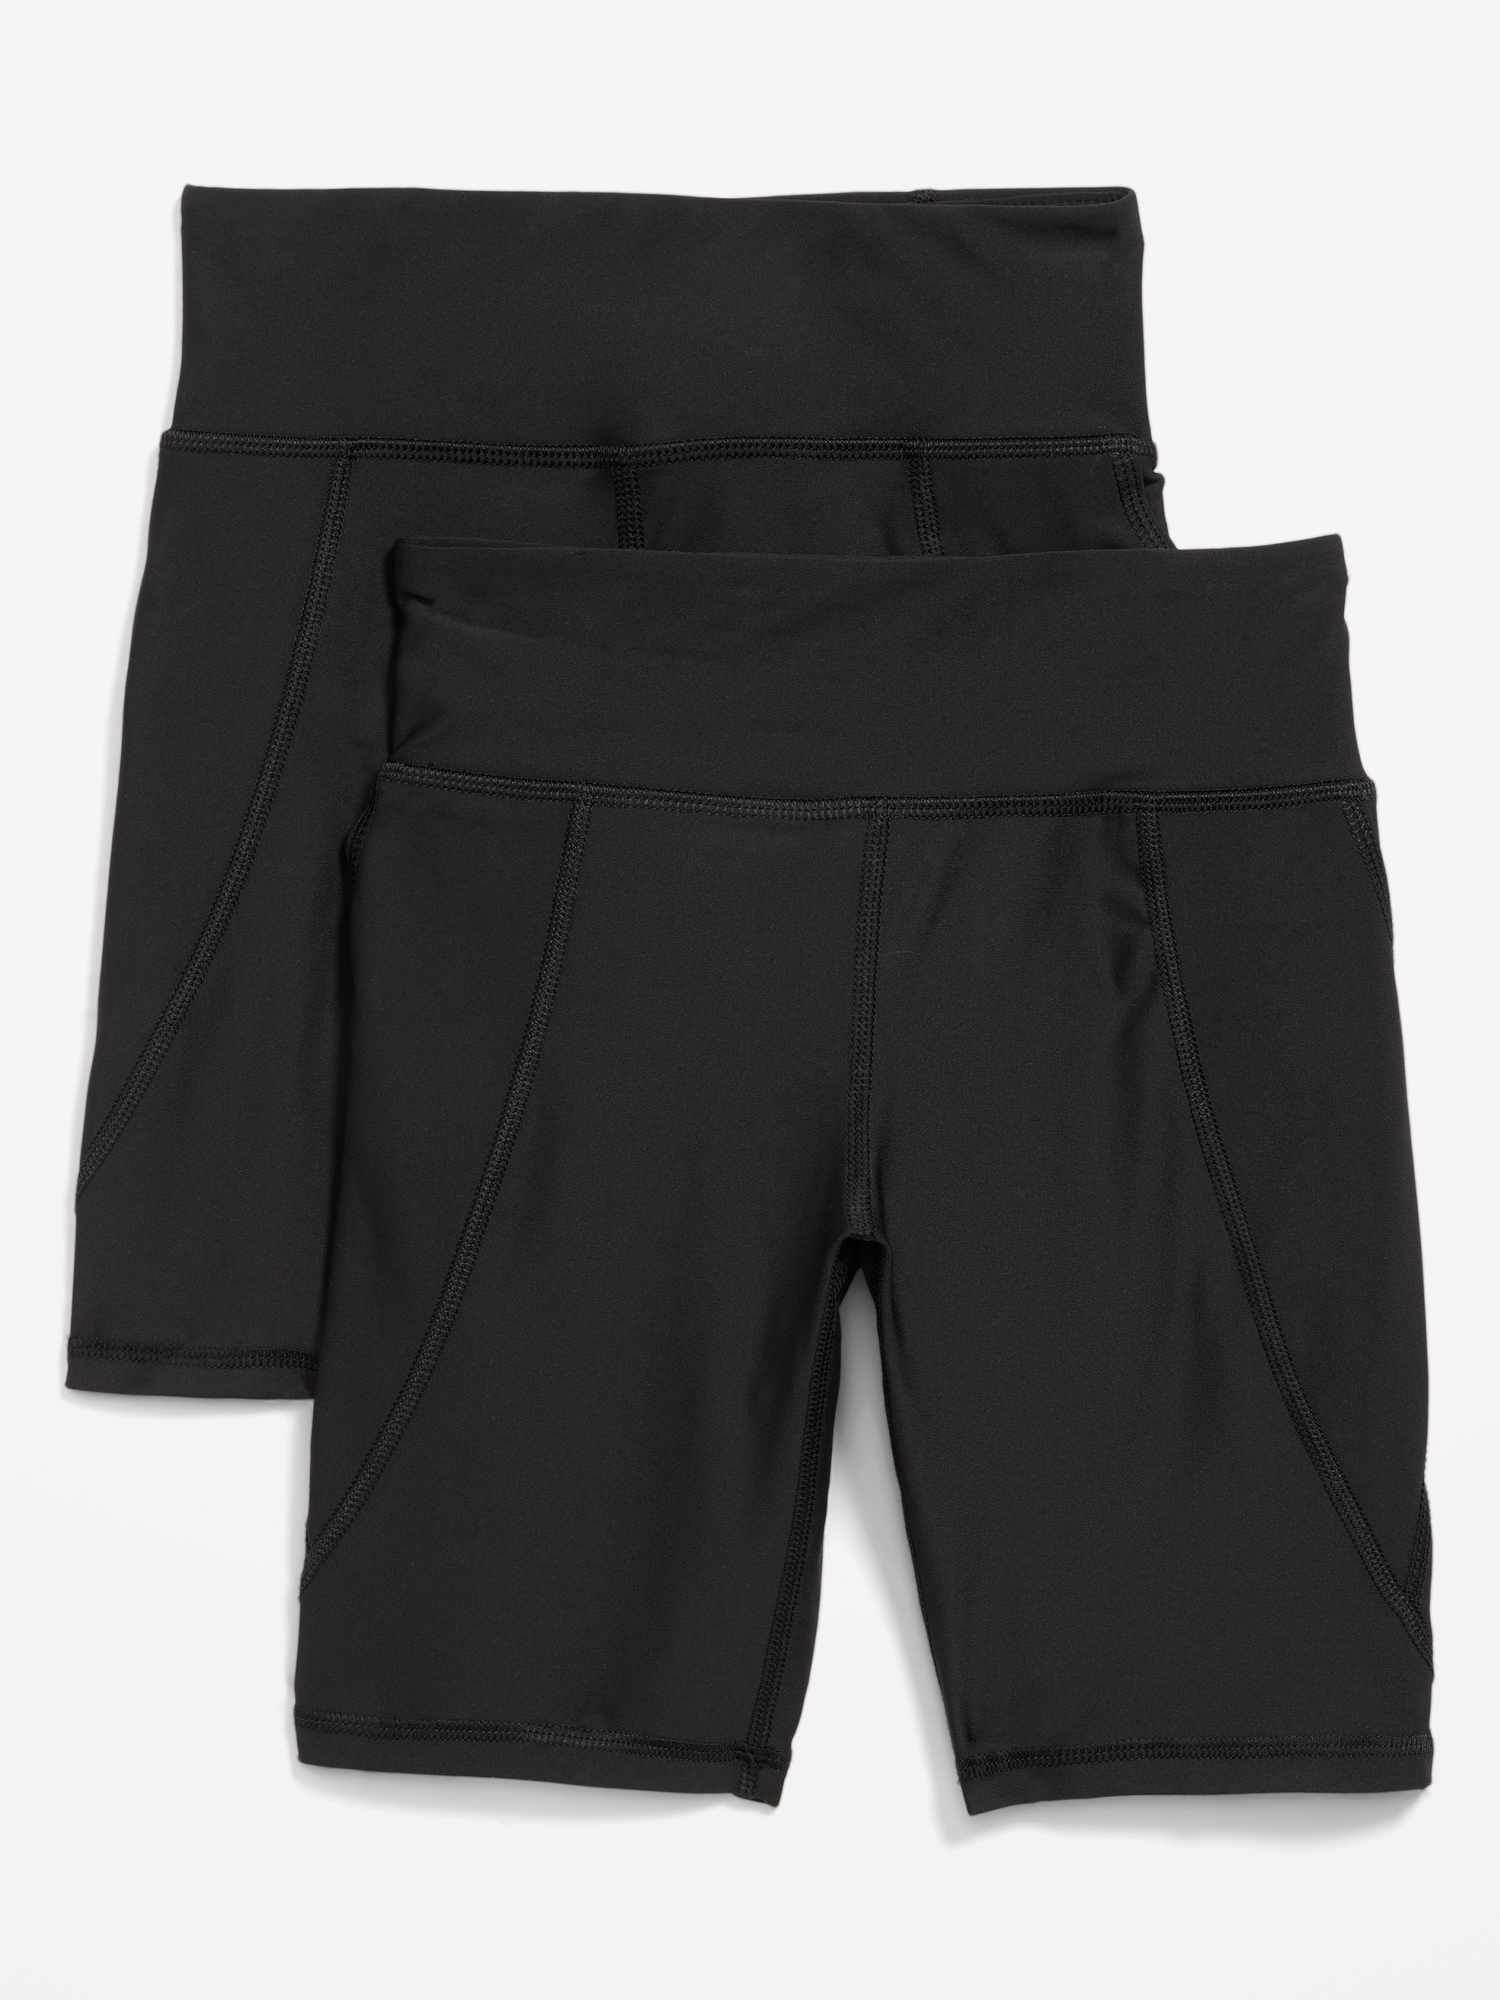 Old Navy High-Waisted PowerSoft Biker Shorts 2-Pack for Girls black. 1